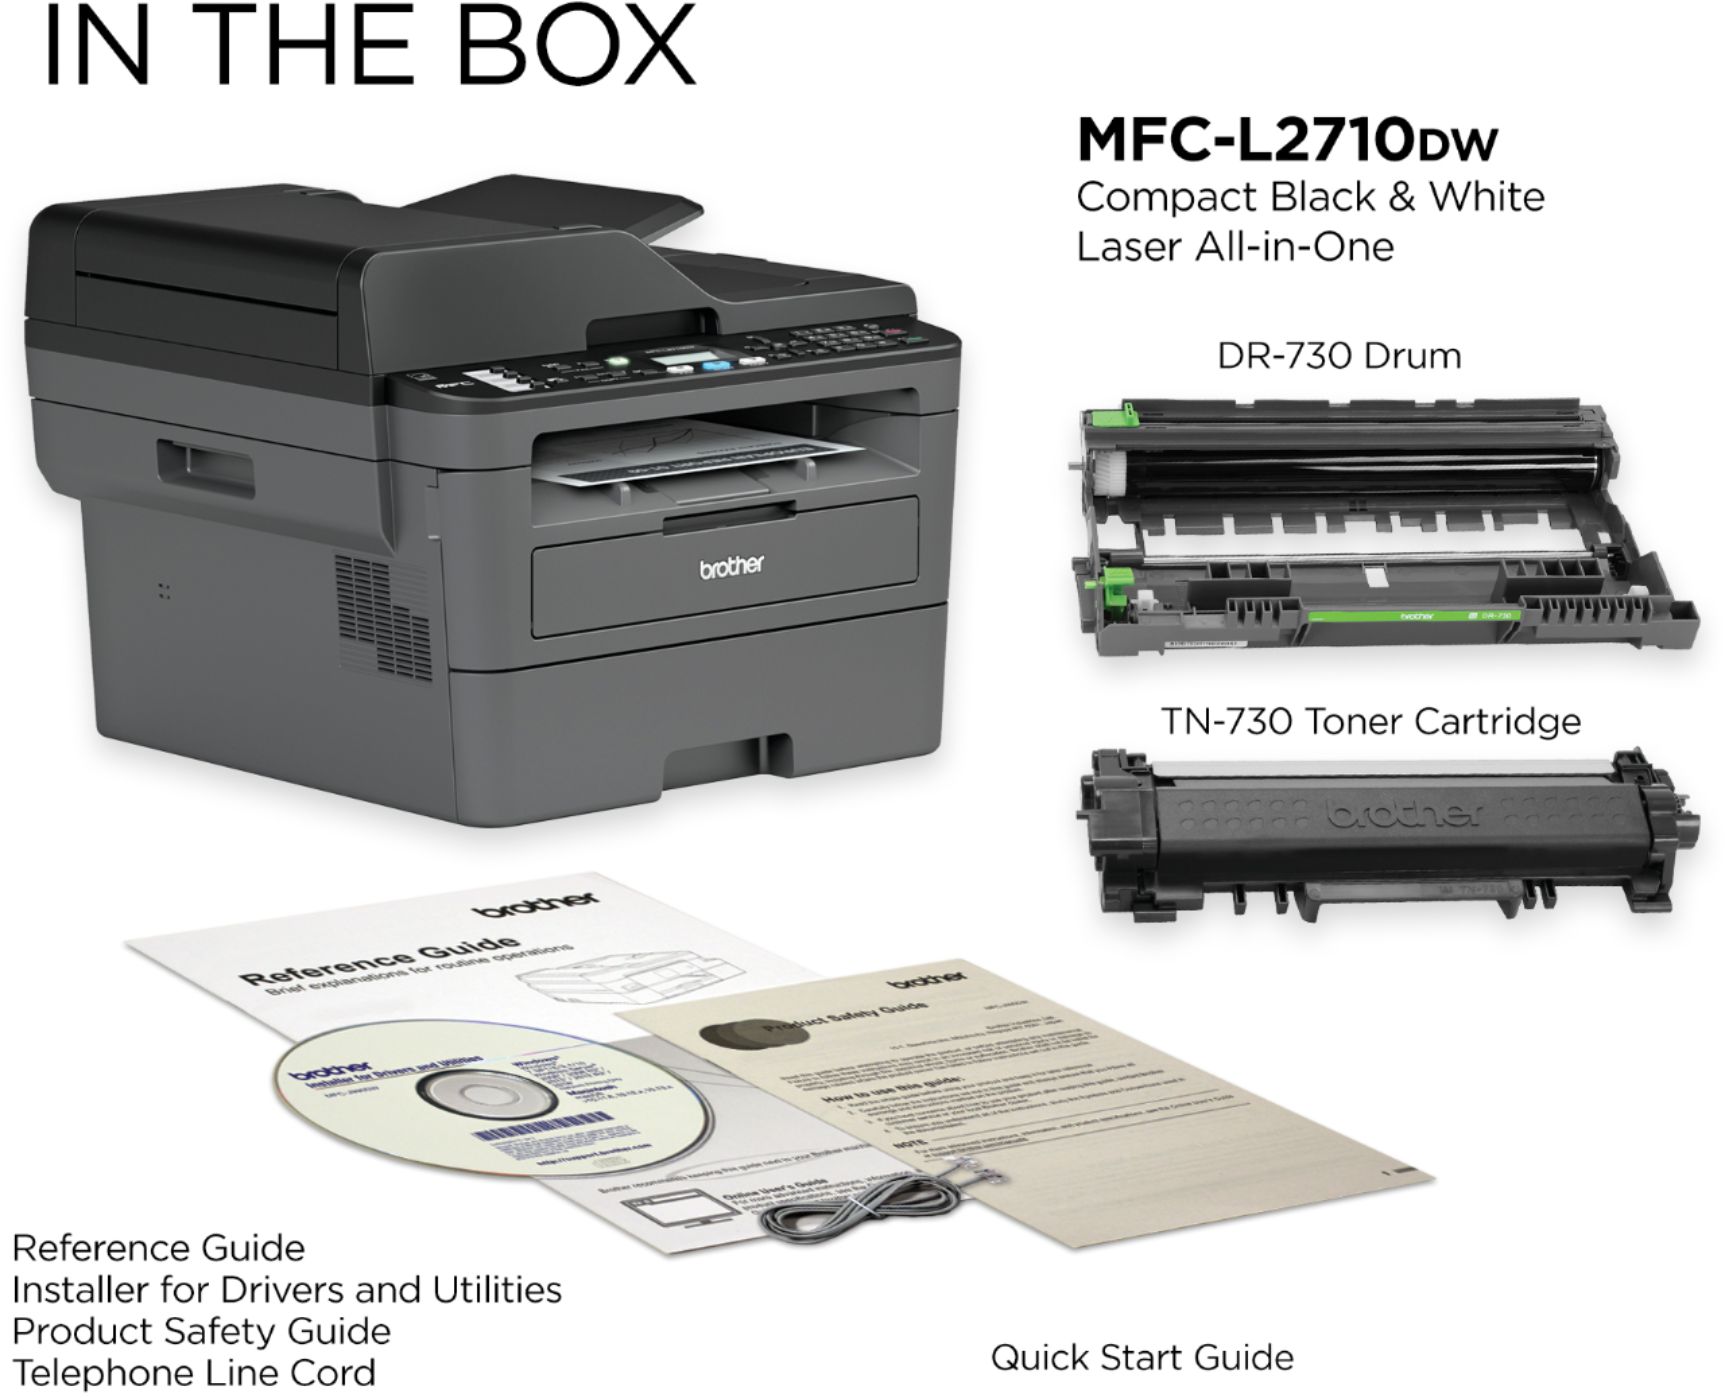 Brother MFC-L2710DN A4 Mono Multifunction Laser Printer